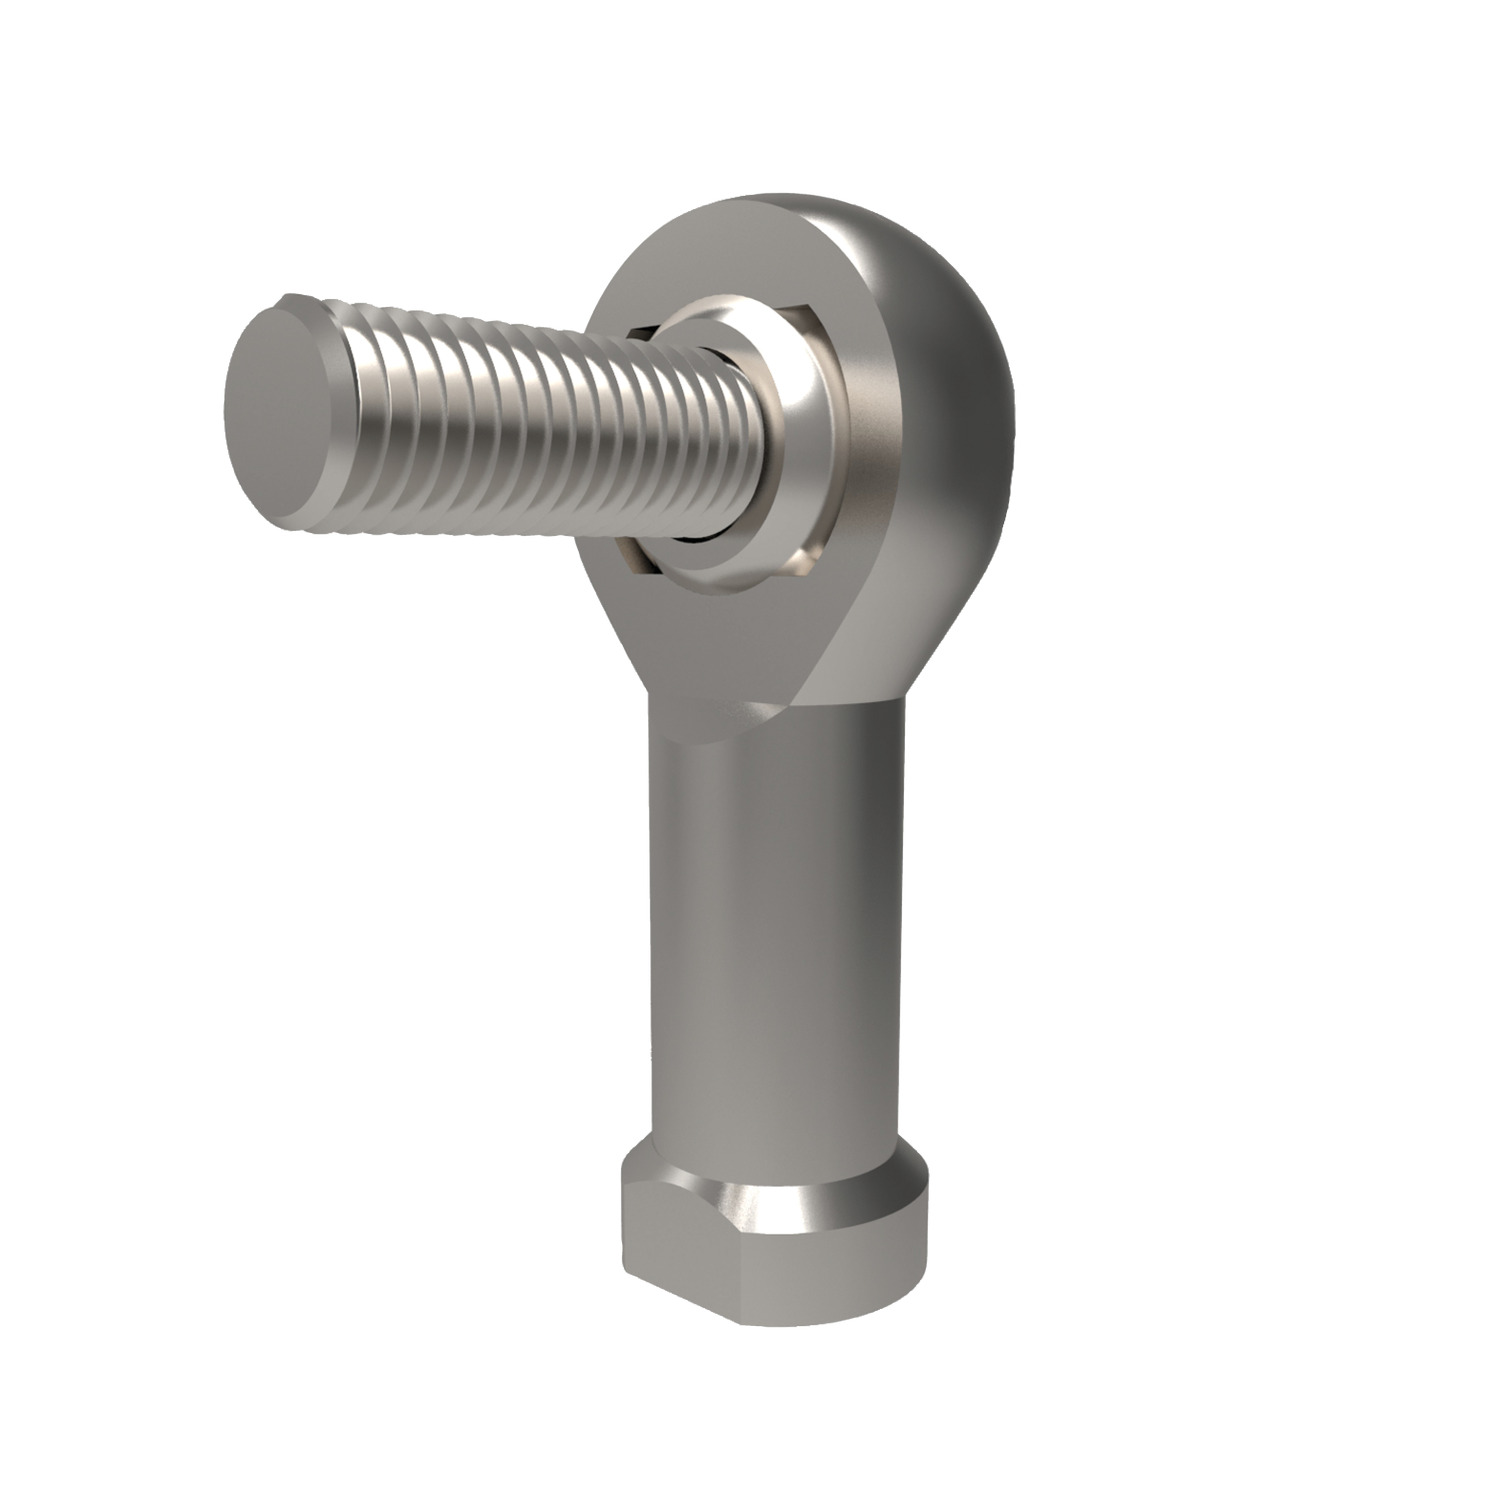 Rod End with Stud - Female Female Rod Ends with studs; also available in stainless steel (R3613).